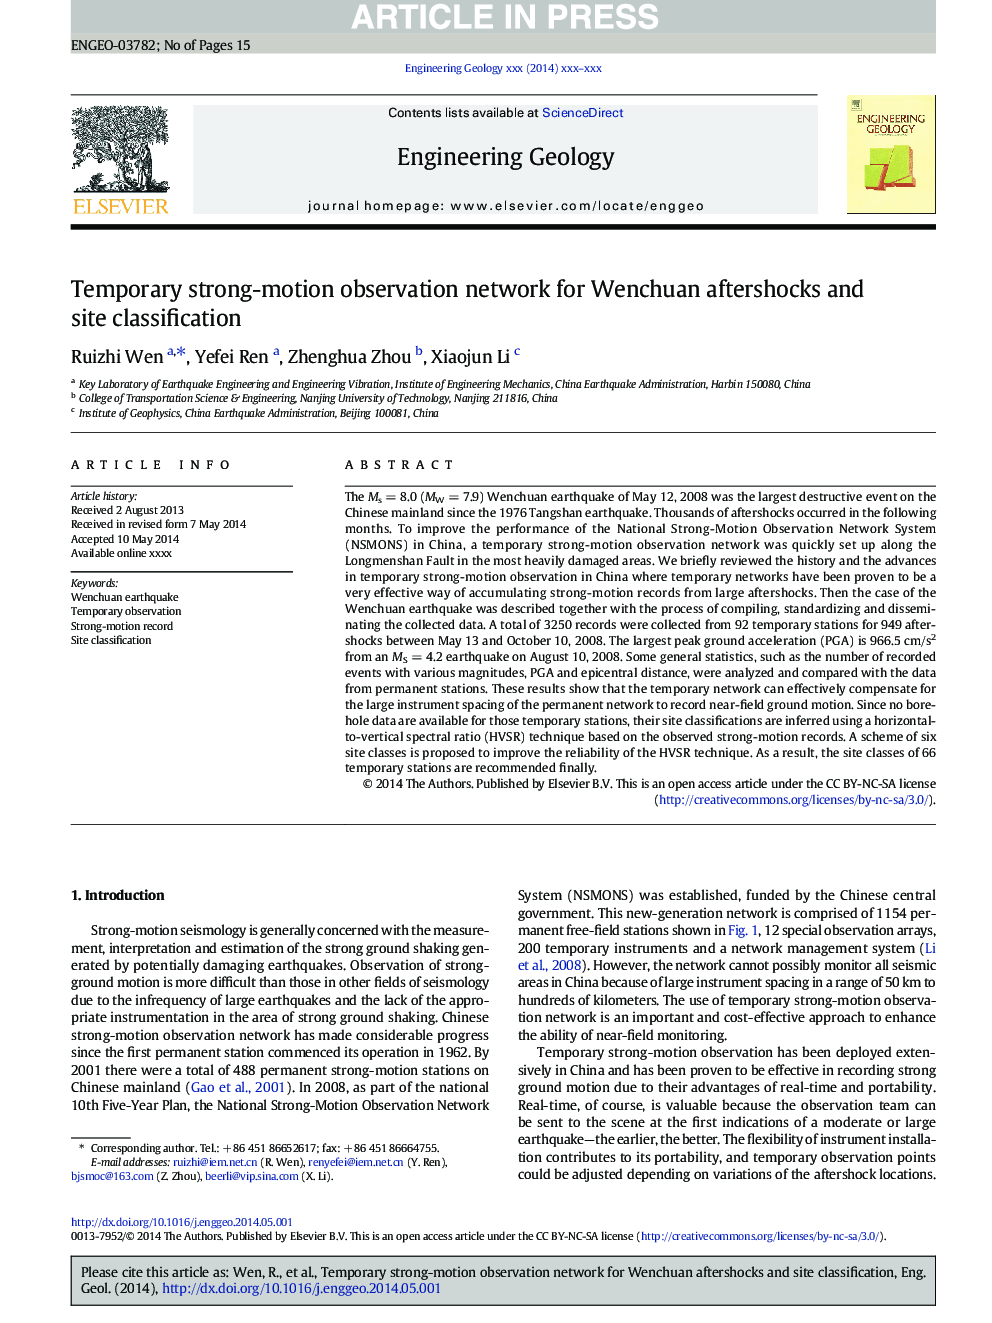 Temporary strong-motion observation network for Wenchuan aftershocks and site classification